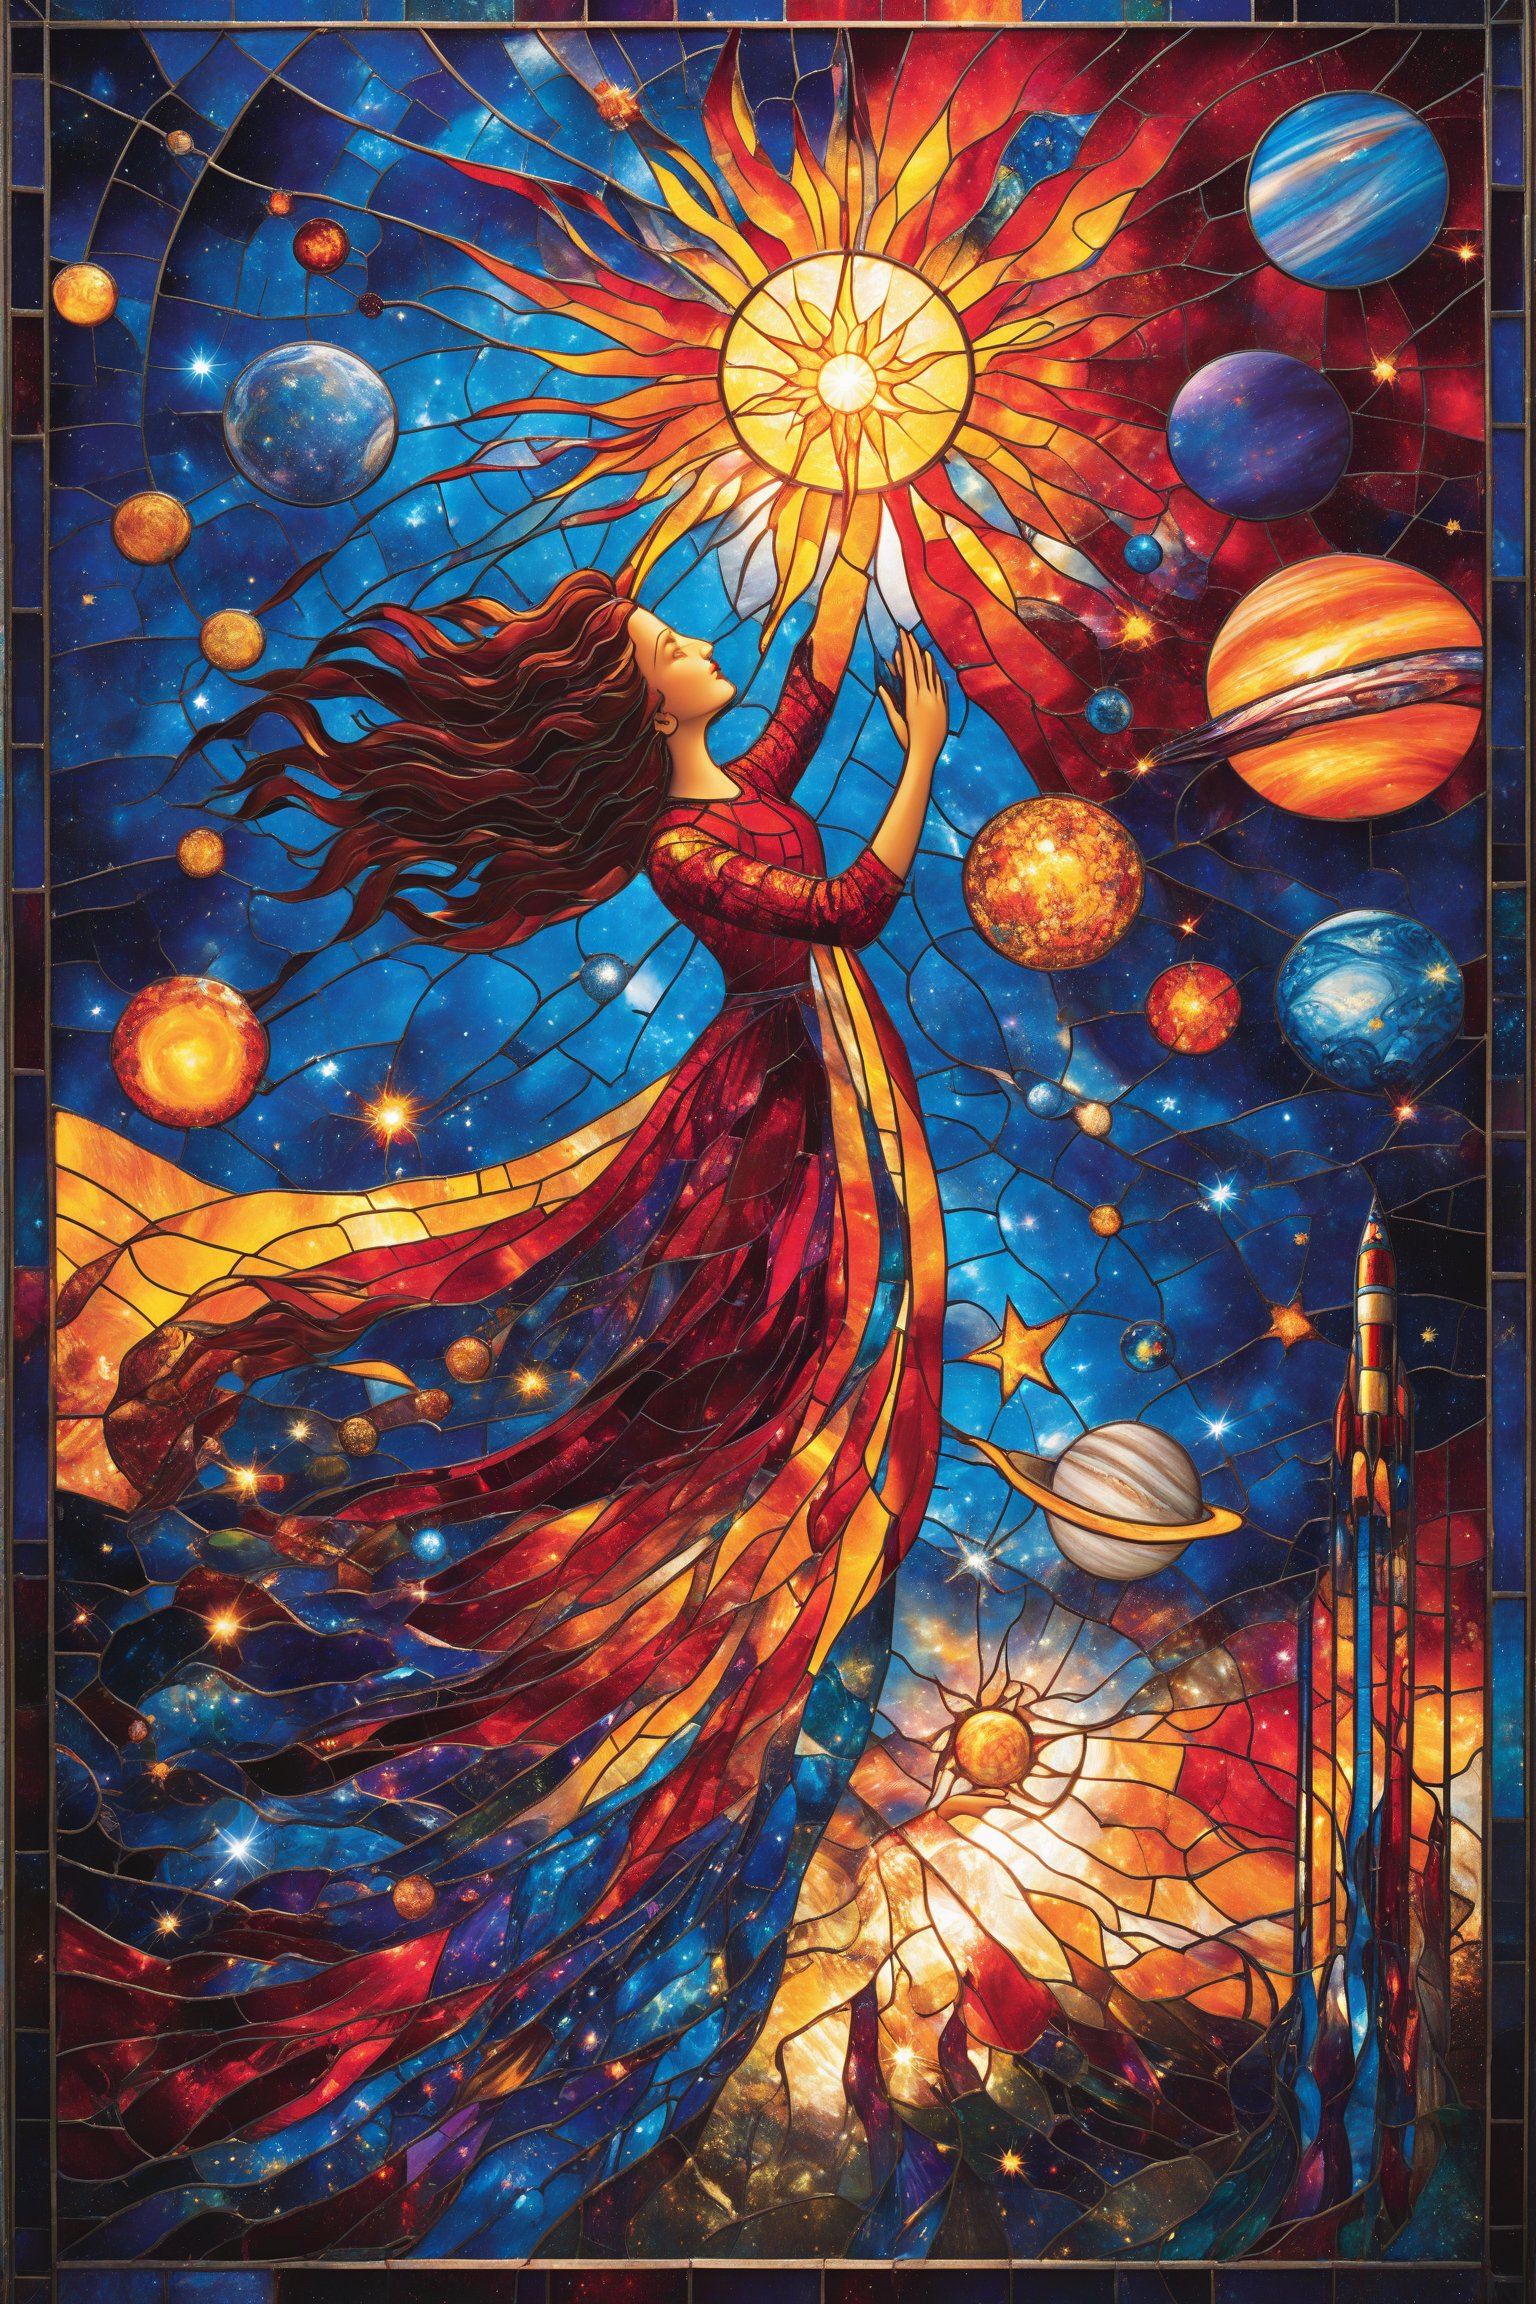 A vibrant stained glass artwork. At its center, there's a silhouette of a woman with flowing hair, reaching out towards a radiant sun. Surrounding her are various celestial bodies like planets, stars, and a rocket. The background is a mesmerizing blend of blues, reds, and yellows, depicting the vastness of space. The woman's dress seems to merge with the cosmos, with its colors and patterns echoing the surrounding universe.